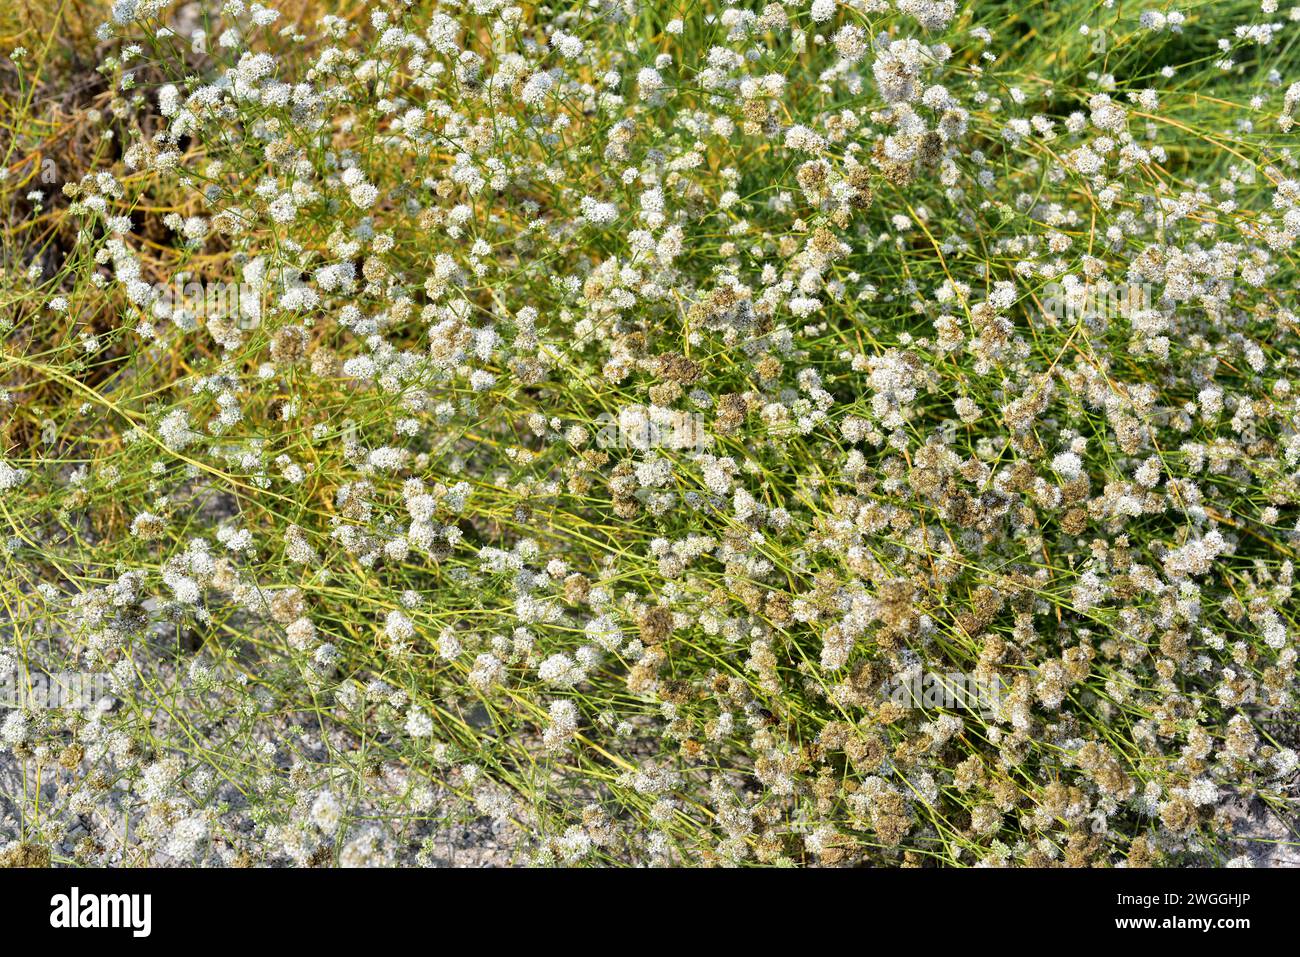 Albada or jabonera (Gypsophyla struthium) is a perennial herb native to gypsaceous soils of Spain. Flowering plant. Stock Photo